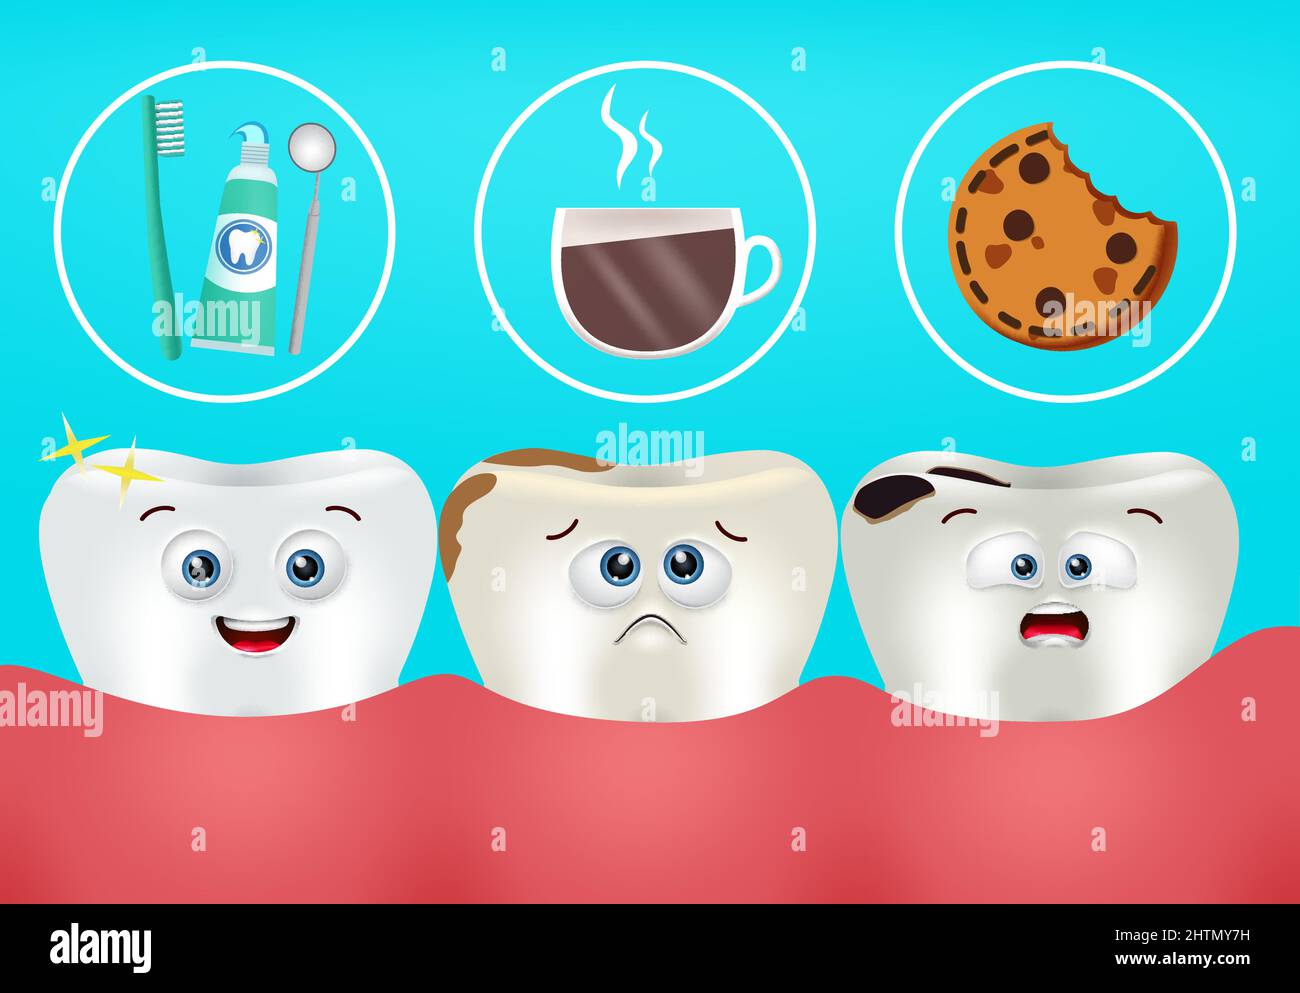 Teeth emoji vector design. Tooth emojis in dental condition with healthy, strong, stain and decay from sweets and coffee elements for oral health. Stock Vector